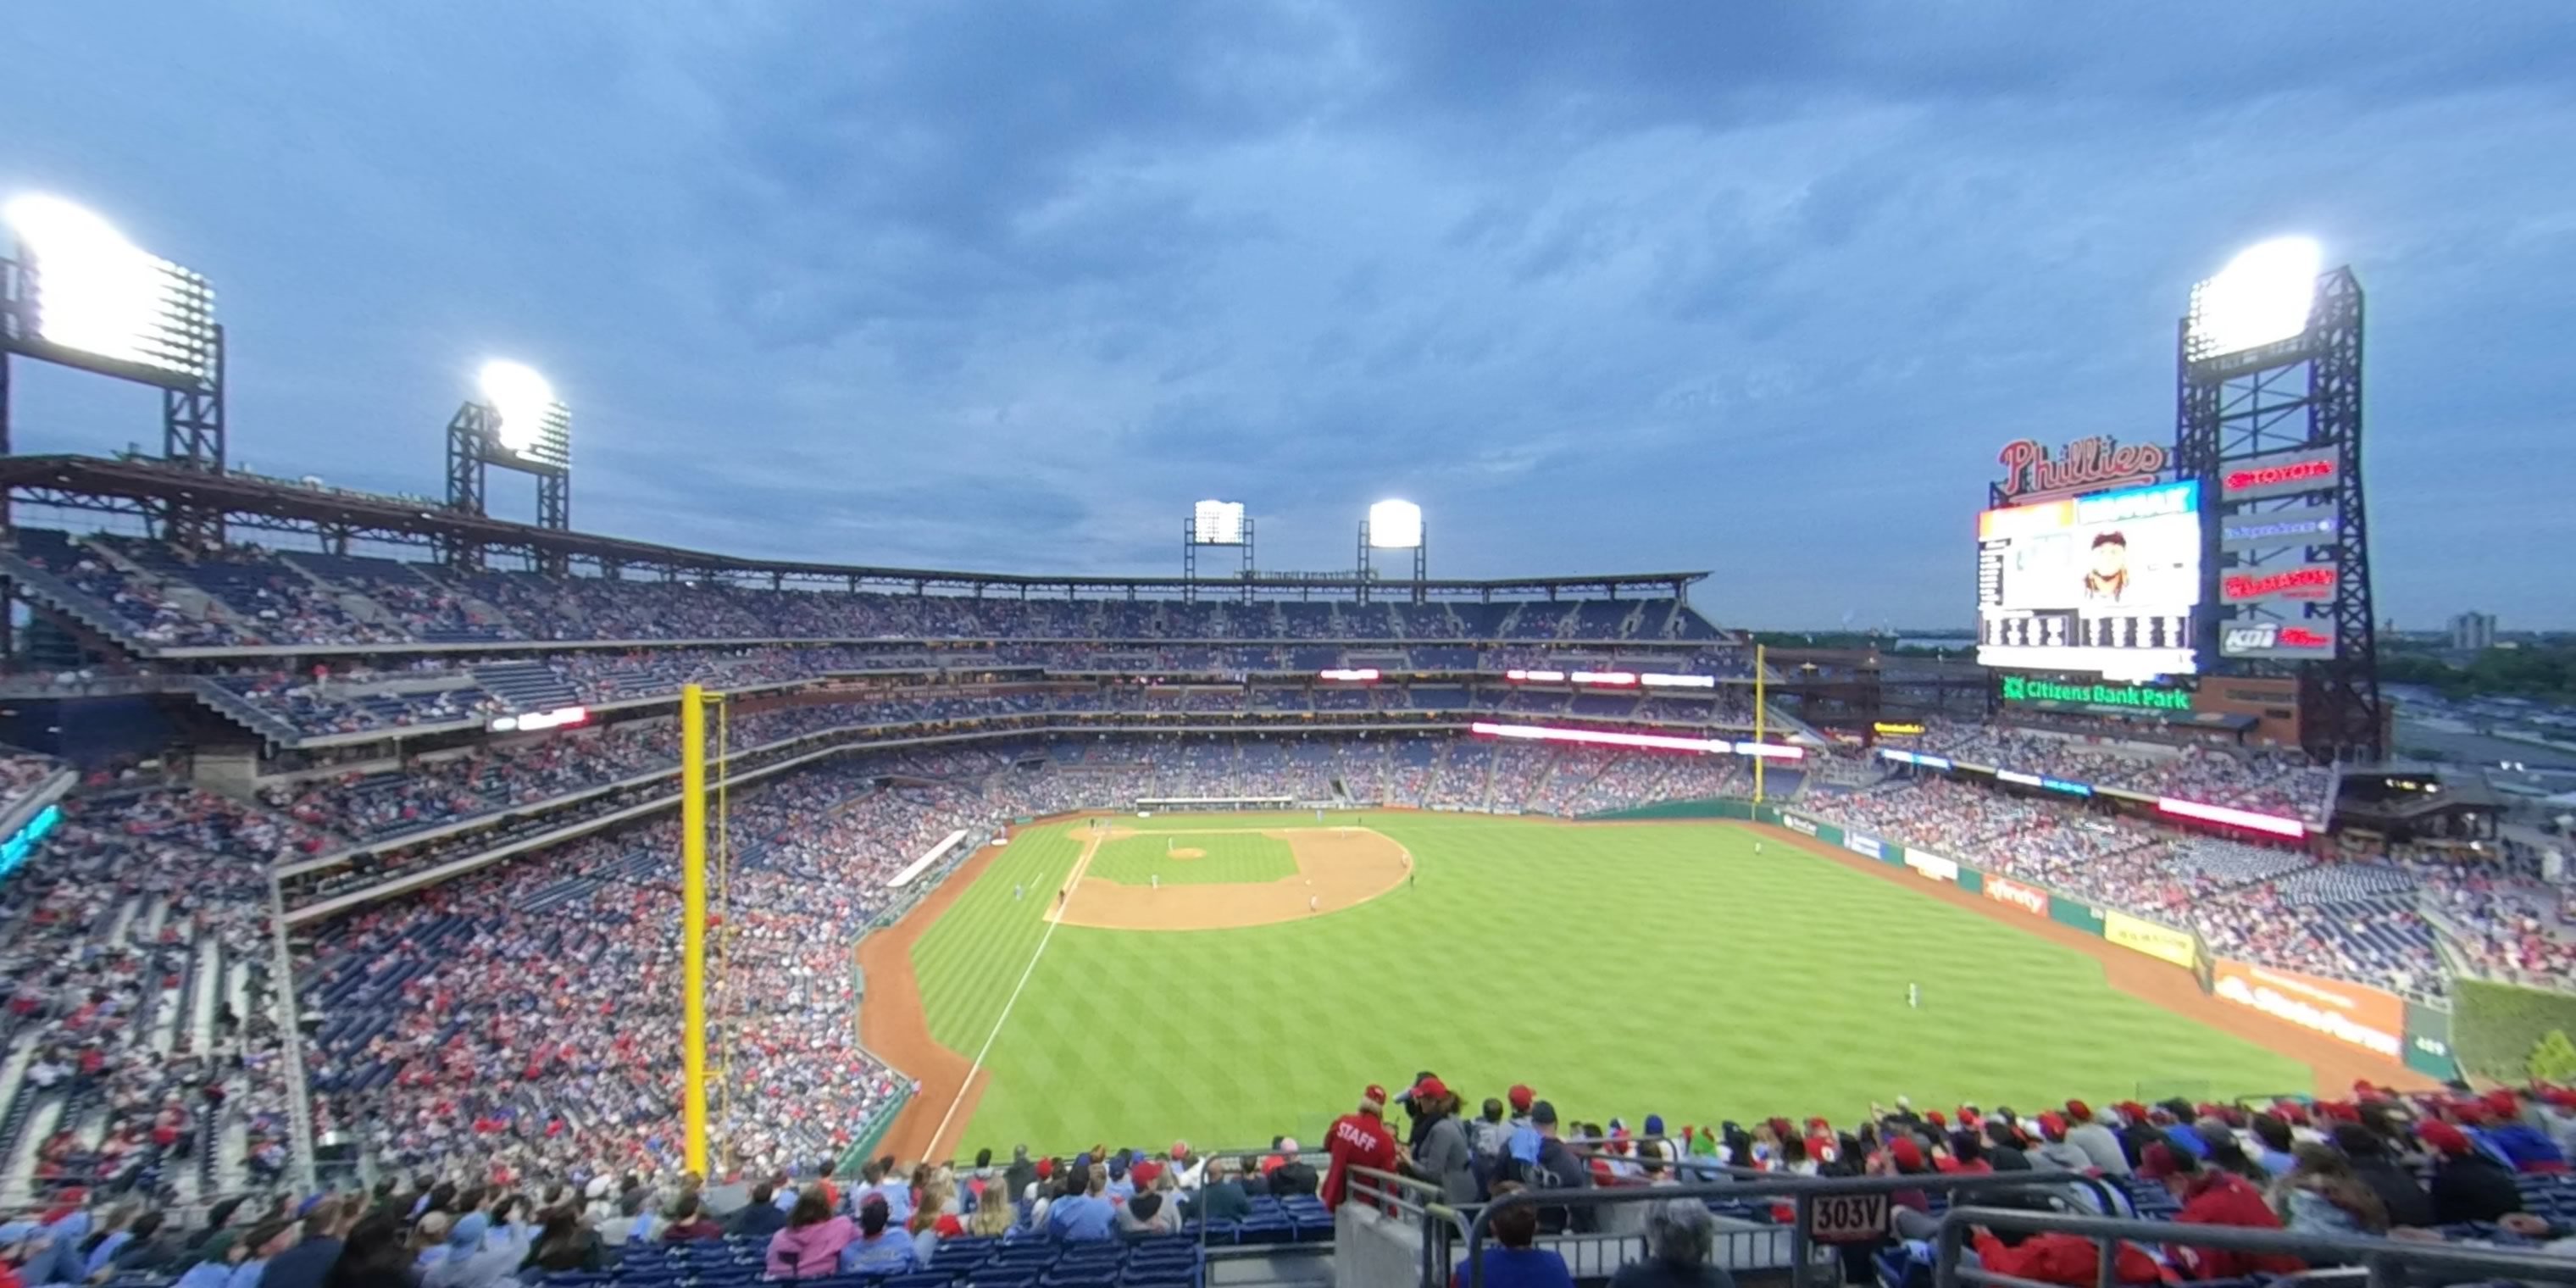 section 303 panoramic seat view  for baseball - citizens bank park